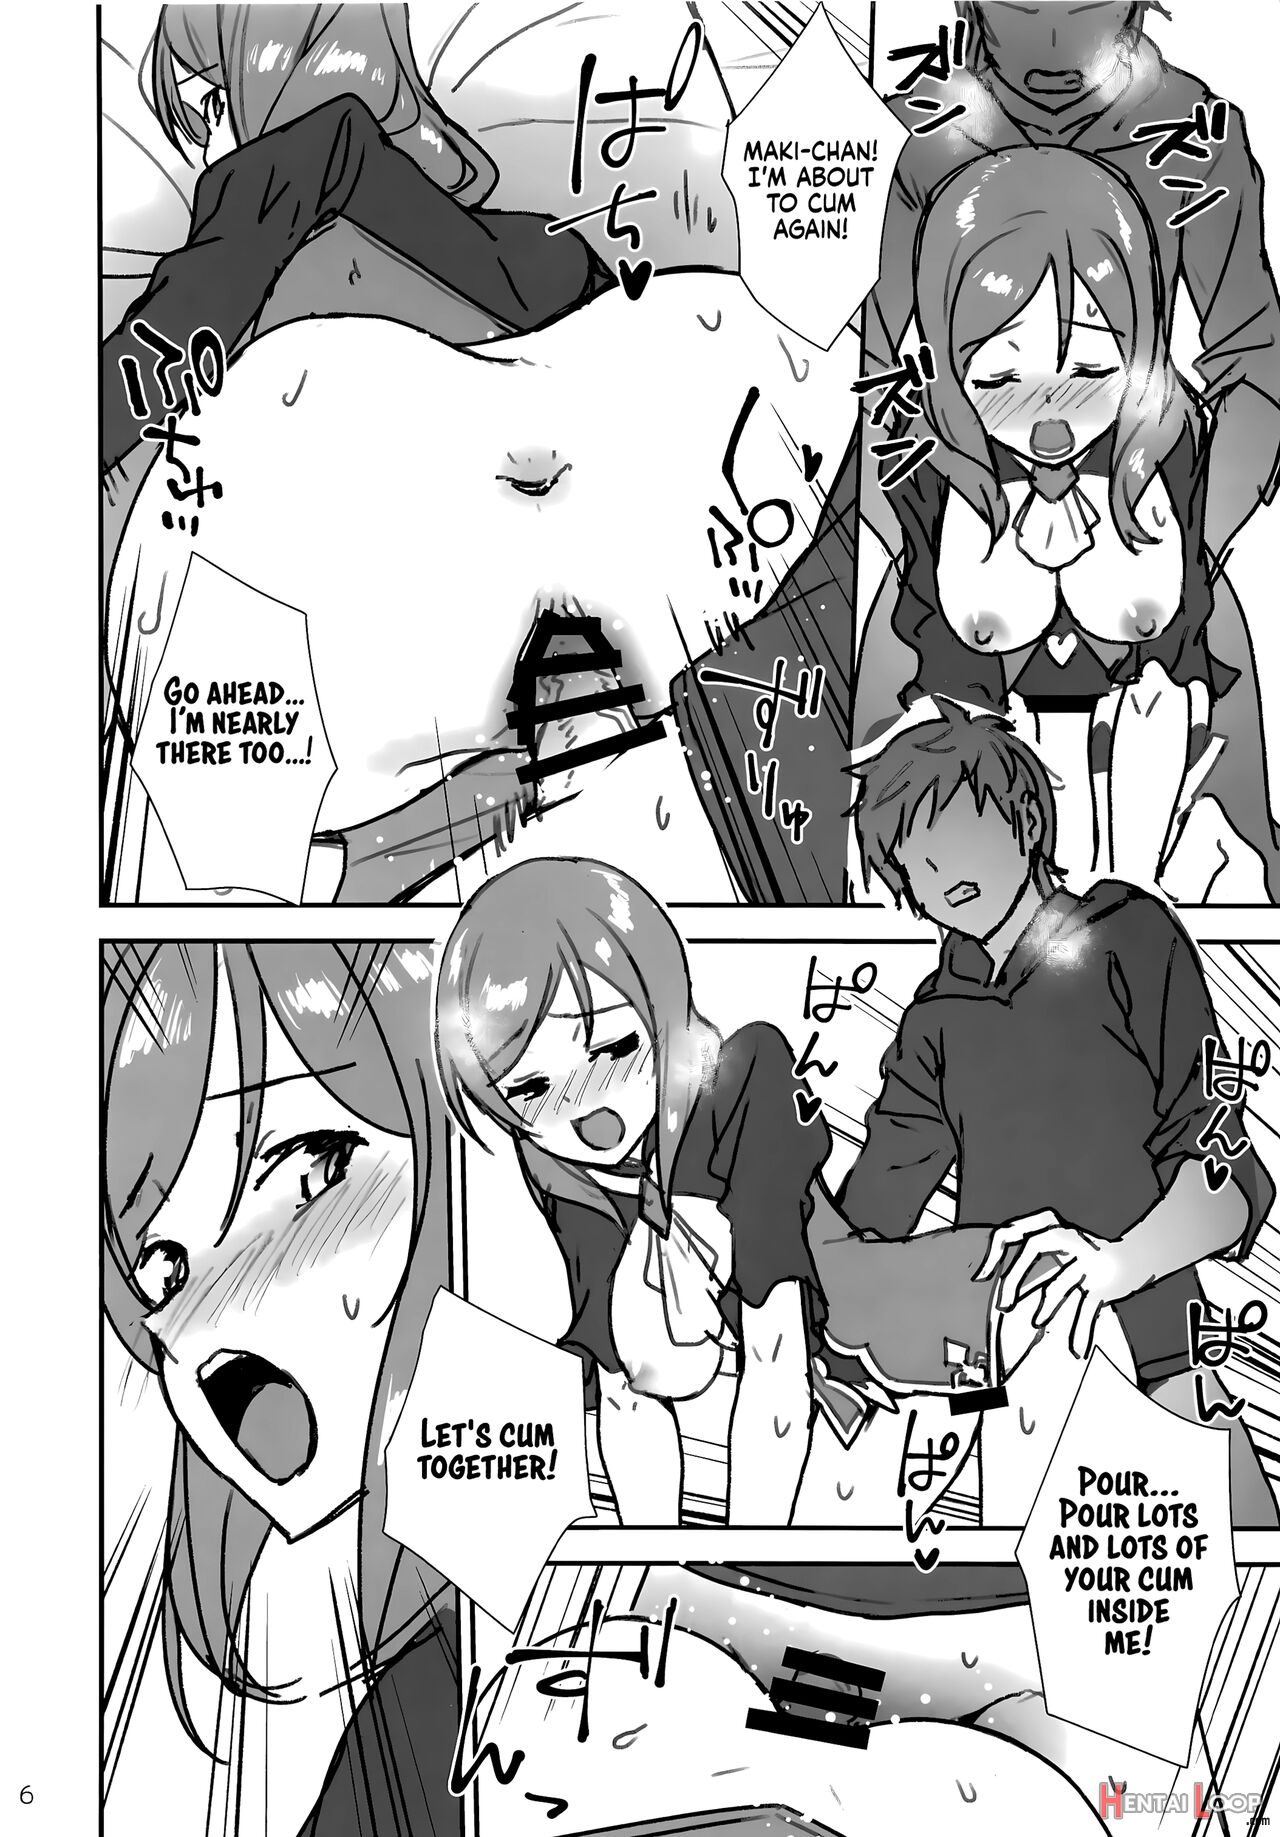 C96 Venue Limited Bonus Book "the Start Of My Brand New Sex Life" page 6